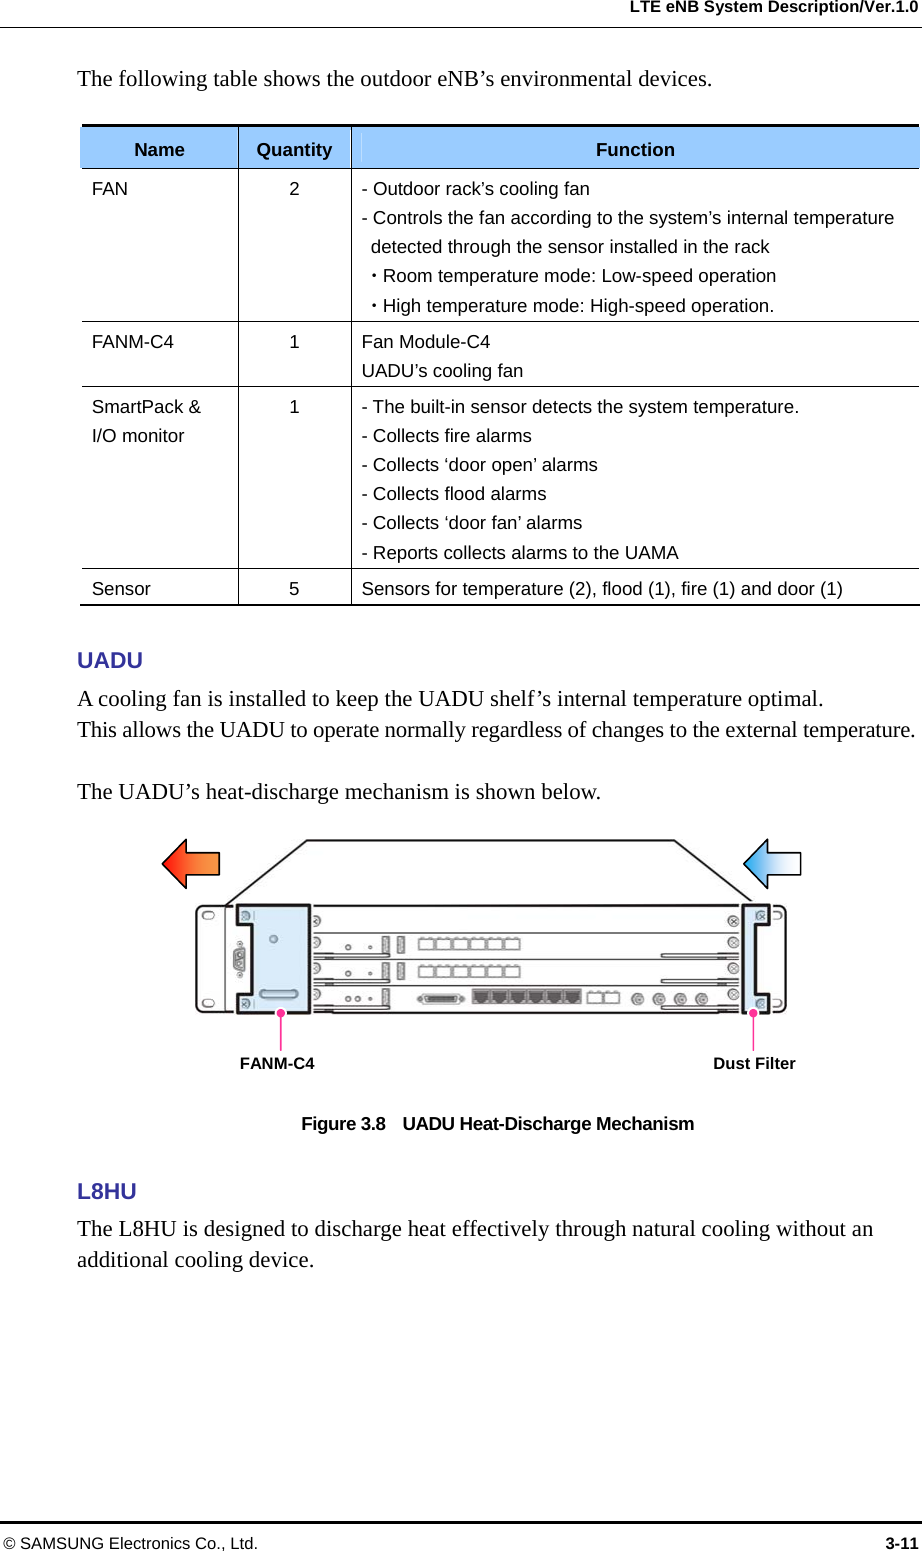  LTE eNB System Description/Ver.1.0 The following table shows the outdoor eNB’s environmental devices.  Name Quantity Function FAN 2  - Outdoor rack’s cooling fan - Controls the fan according to the system’s internal temperature detected through the sensor installed in the rack  Room temperature mode: Low-speed operation  High temperature mode: High-speed operation. FANM-C4 1 Fan Module-C4 UADU’s cooling fan SmartPack &amp; I/O monitor 1  - The built-in sensor detects the system temperature. - Collects fire alarms - Collects ‘door open’ alarms - Collects flood alarms - Collects ‘door fan’ alarms - Reports collects alarms to the UAMA Sensor 5  Sensors for temperature (2), flood (1), fire (1) and door (1)  UADU A cooling fan is installed to keep the UADU shelf’s internal temperature optimal.   This allows the UADU to operate normally regardless of changes to the external temperature.  The UADU’s heat-discharge mechanism is shown below.  FANM-C4 Dust Filter Figure 3.8    UADU Heat-Discharge Mechanism  L8HU The L8HU is designed to discharge heat effectively through natural cooling without an additional cooling device.  © SAMSUNG Electronics Co., Ltd.  3-11 